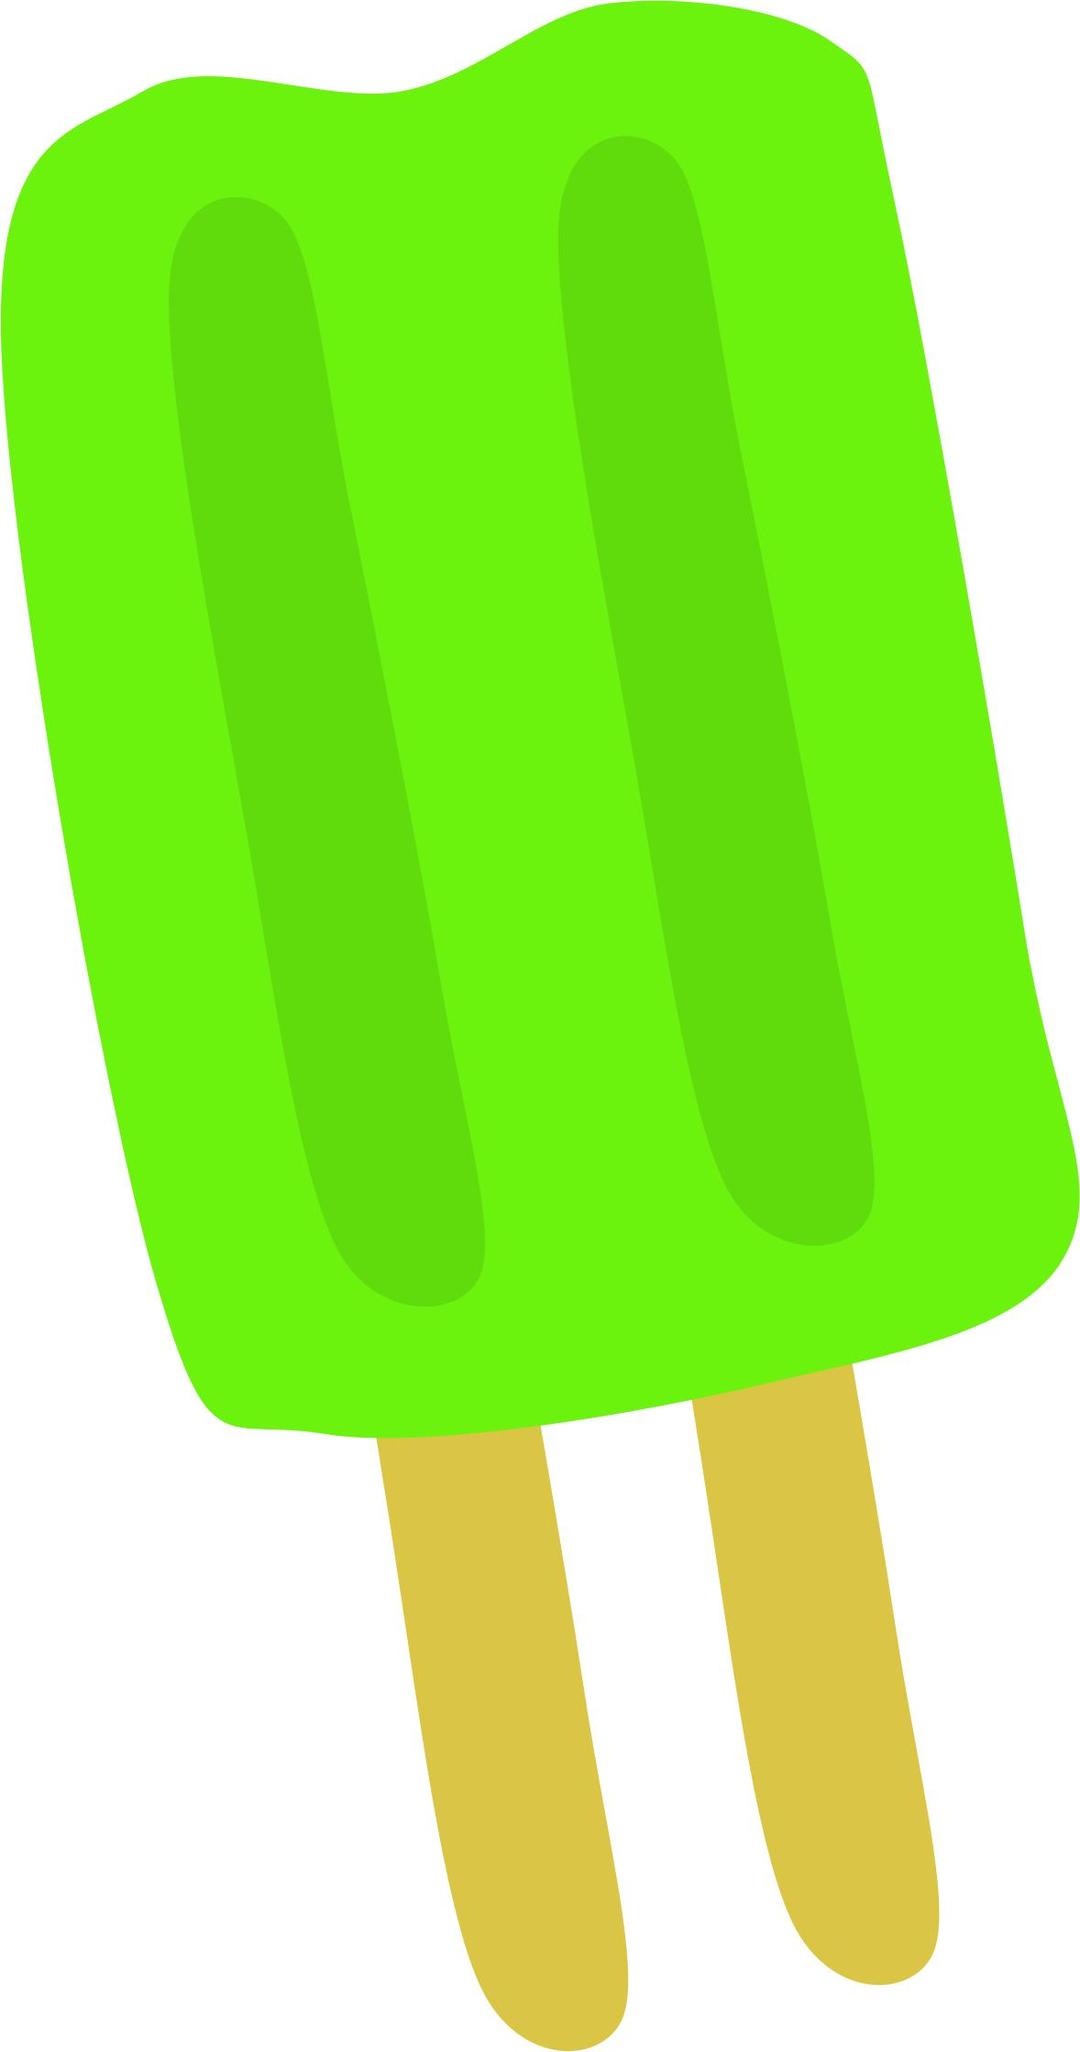 Green Popsicle png transparent